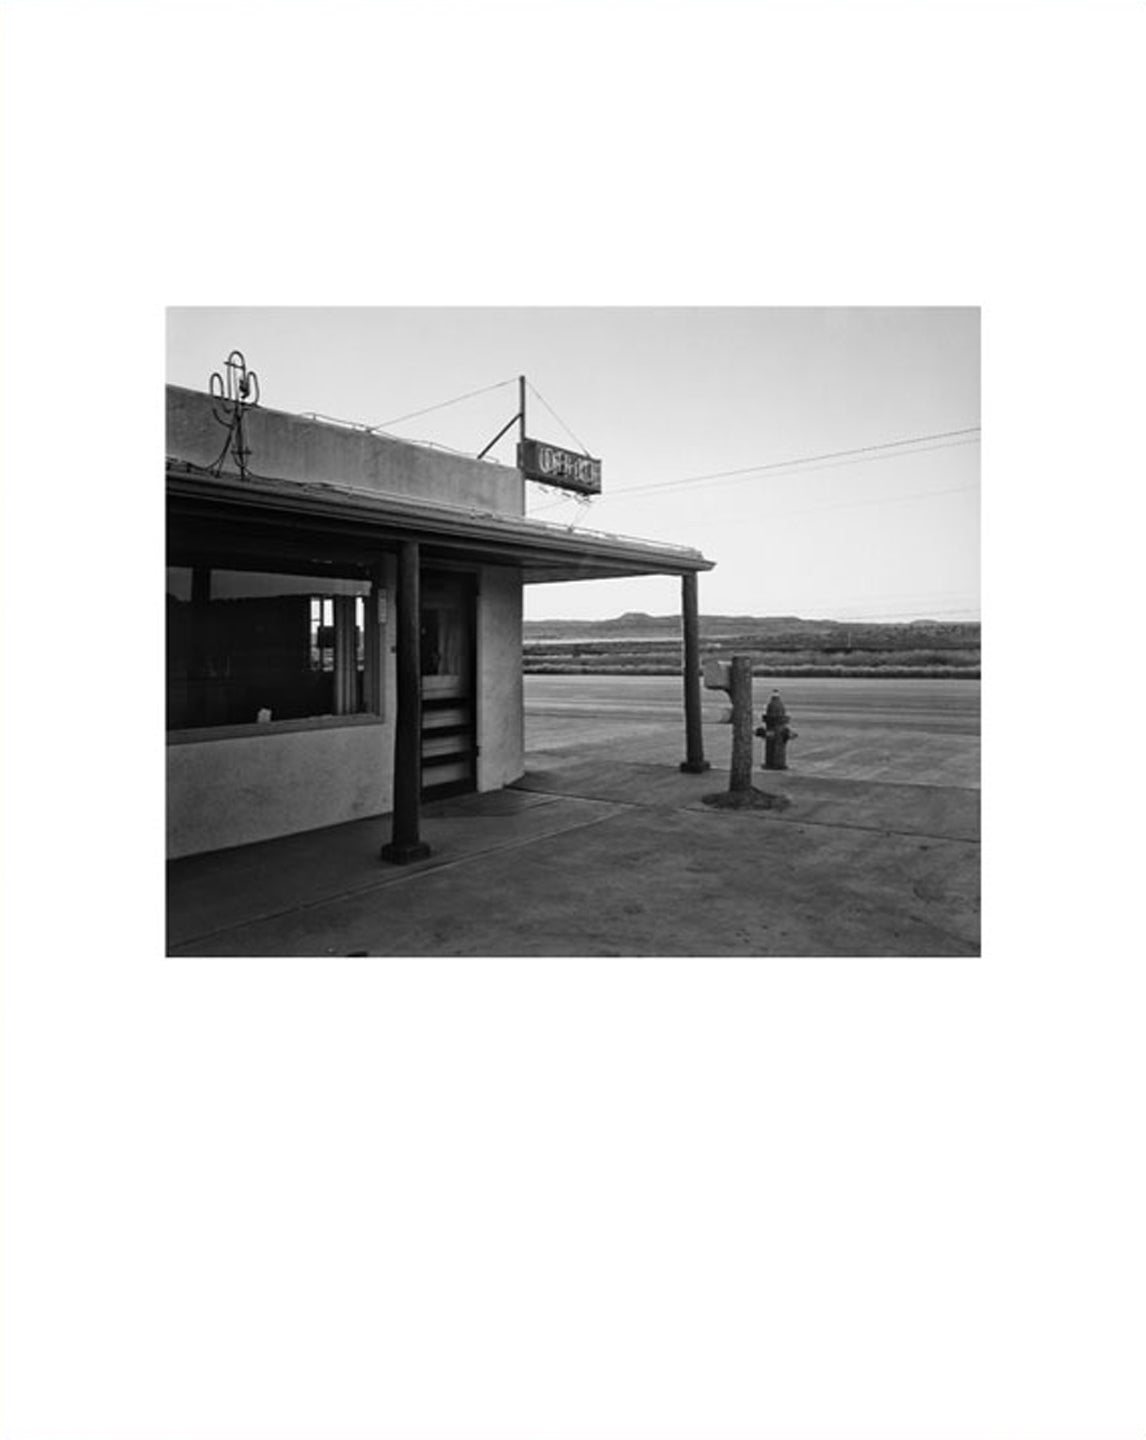 NZ Library #1: John Schott: Route 66, Special Limited Edition (with Gelatin Silver Contact Print "New Topographics #122 Untitled, 1973," Motel Office with Neon Cactus Sign) (NZ Library - Set One, Volume Six)